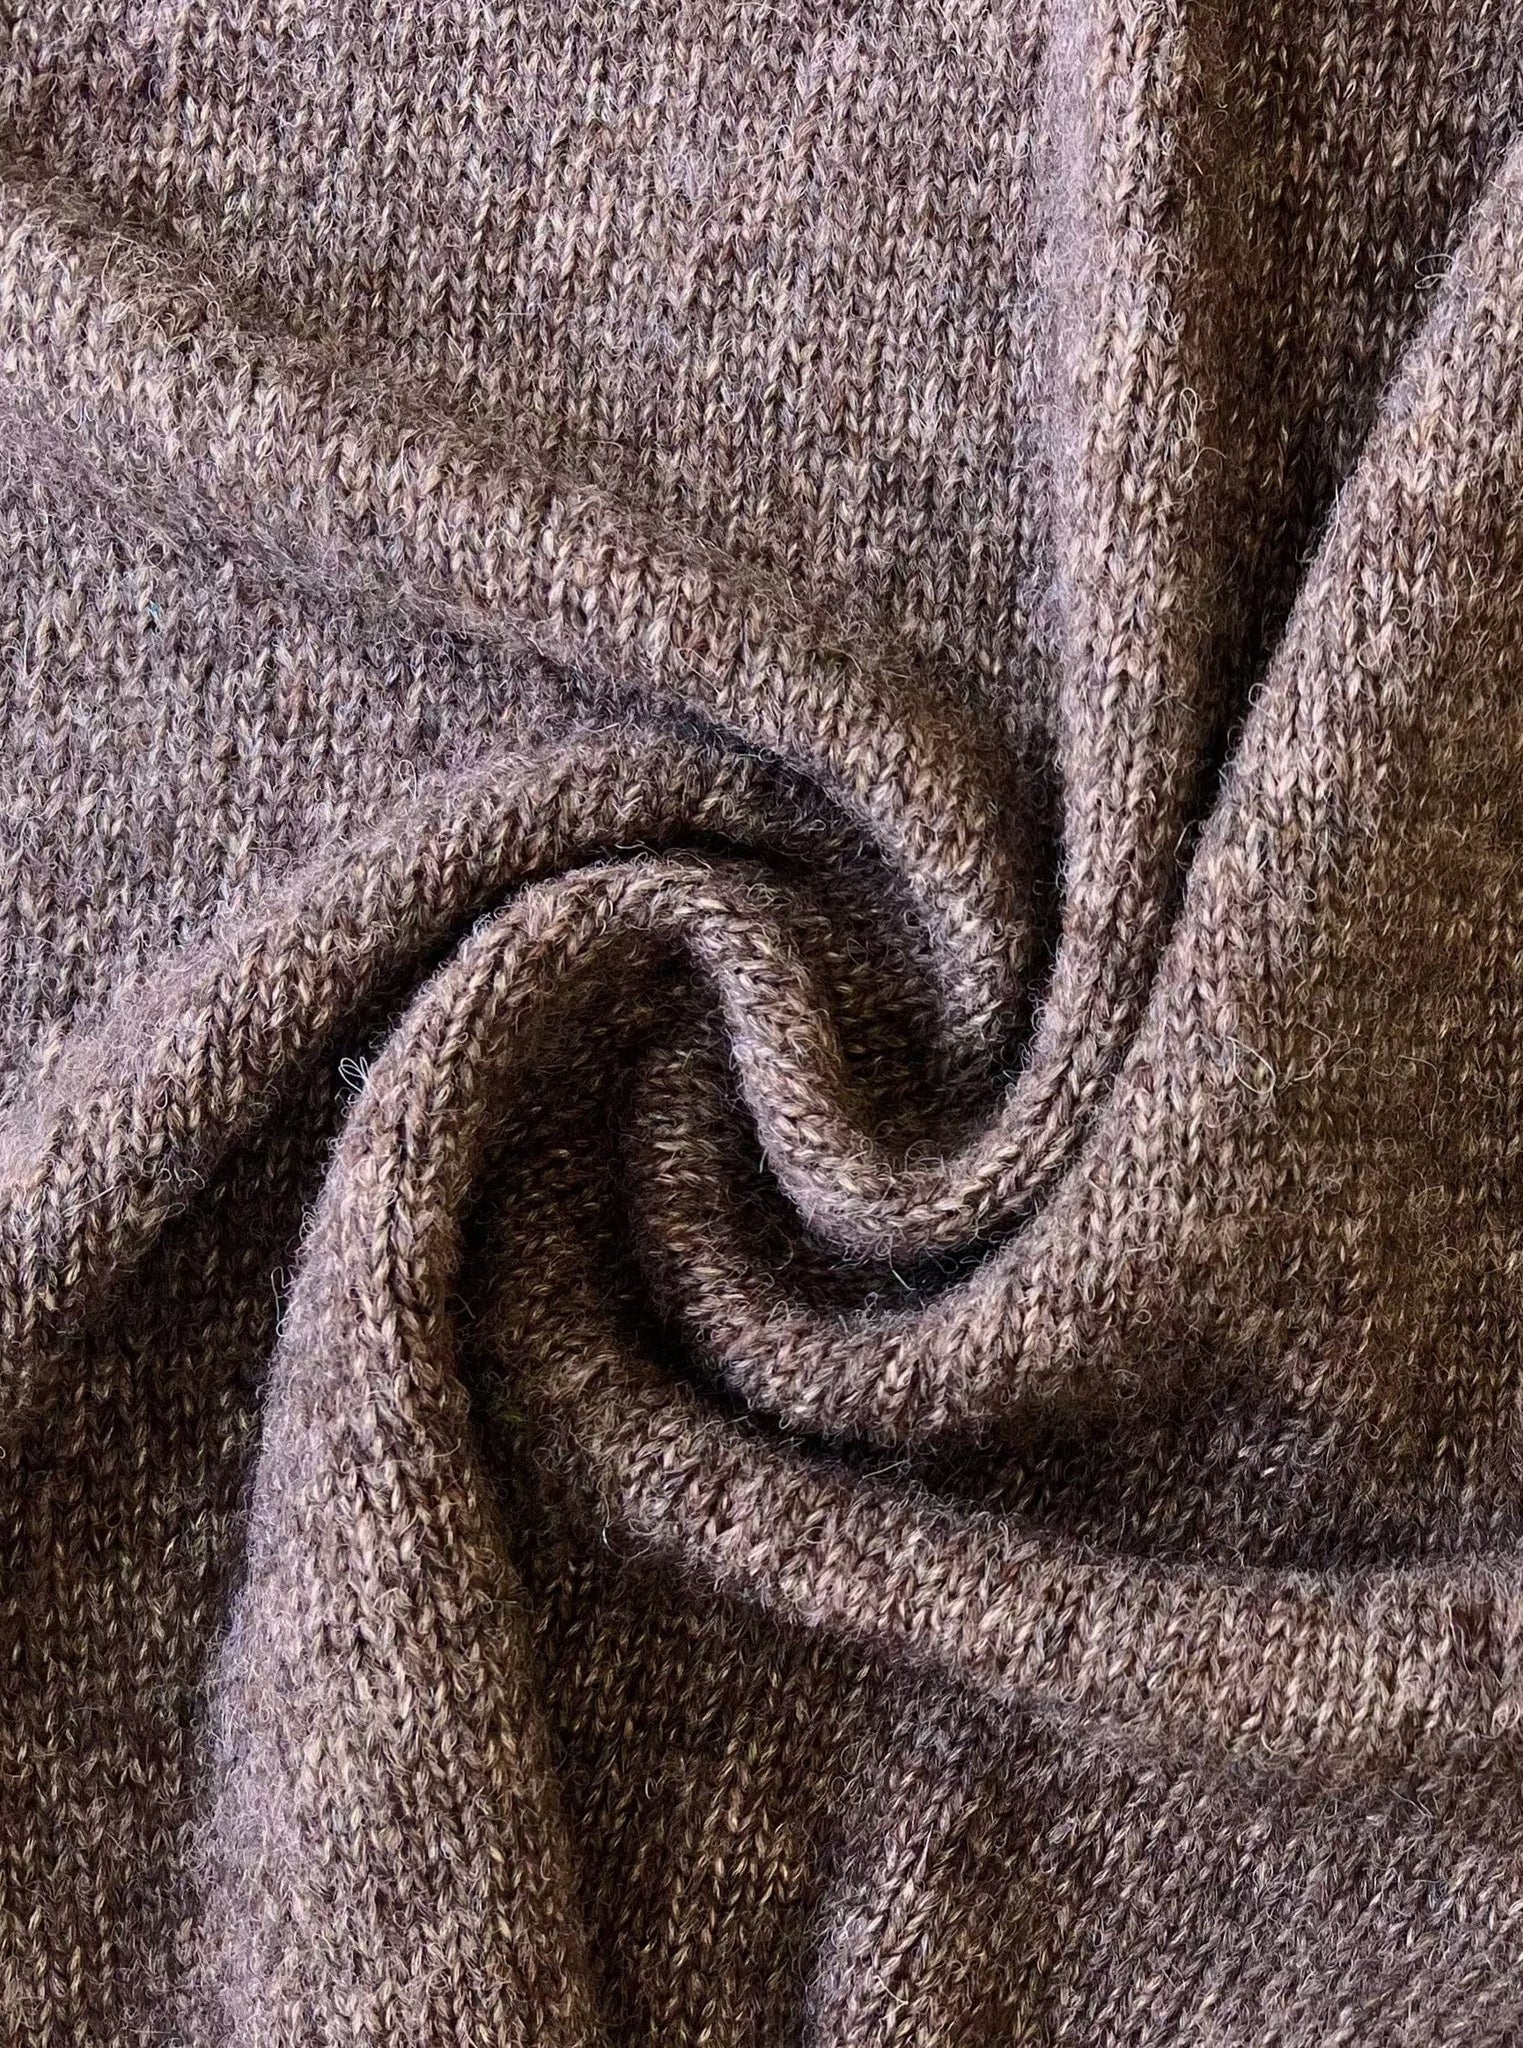 A close up of the Heirloom Knit Scarf - Nutty Brown - pre-order fabric.